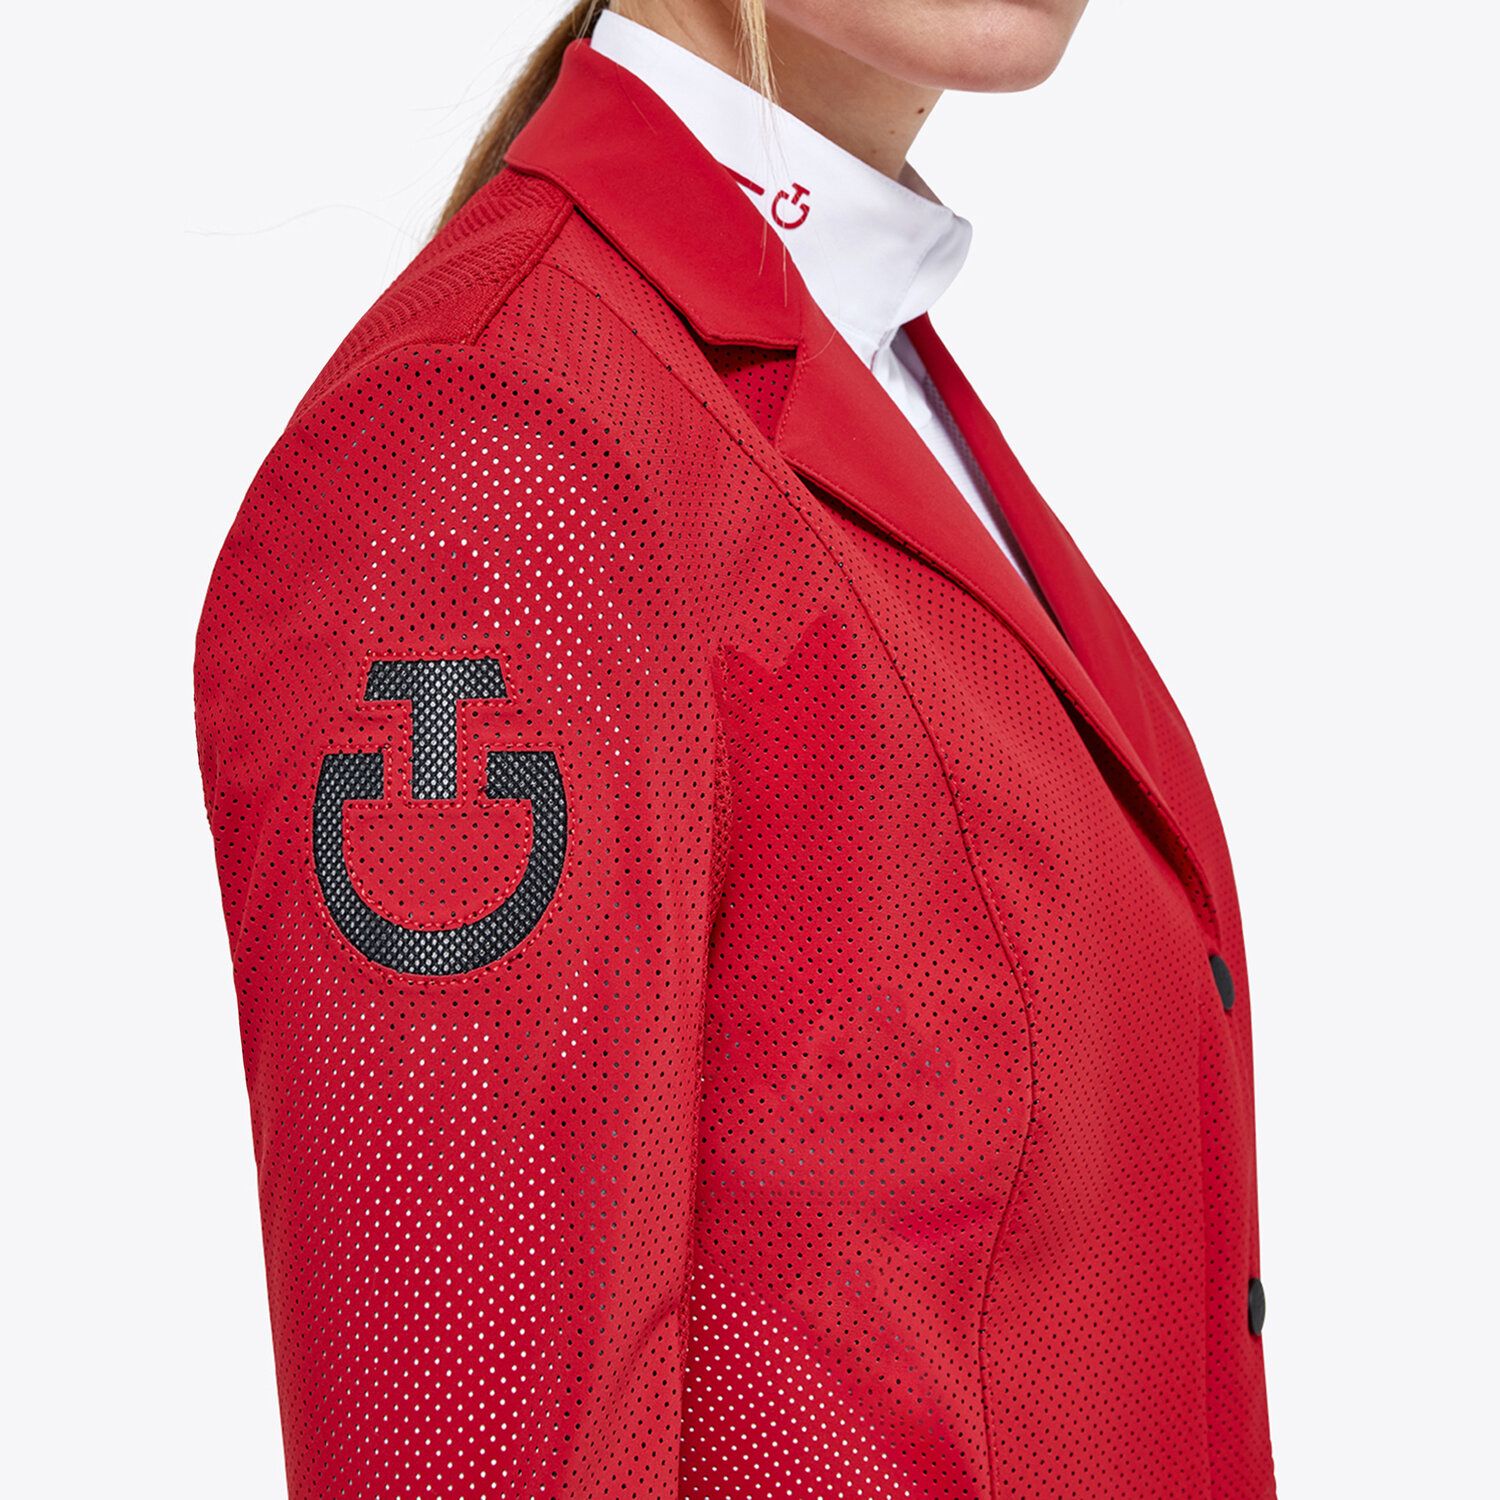 Cavalleria Toscana Women's competition riding jacket embroidery RED-6